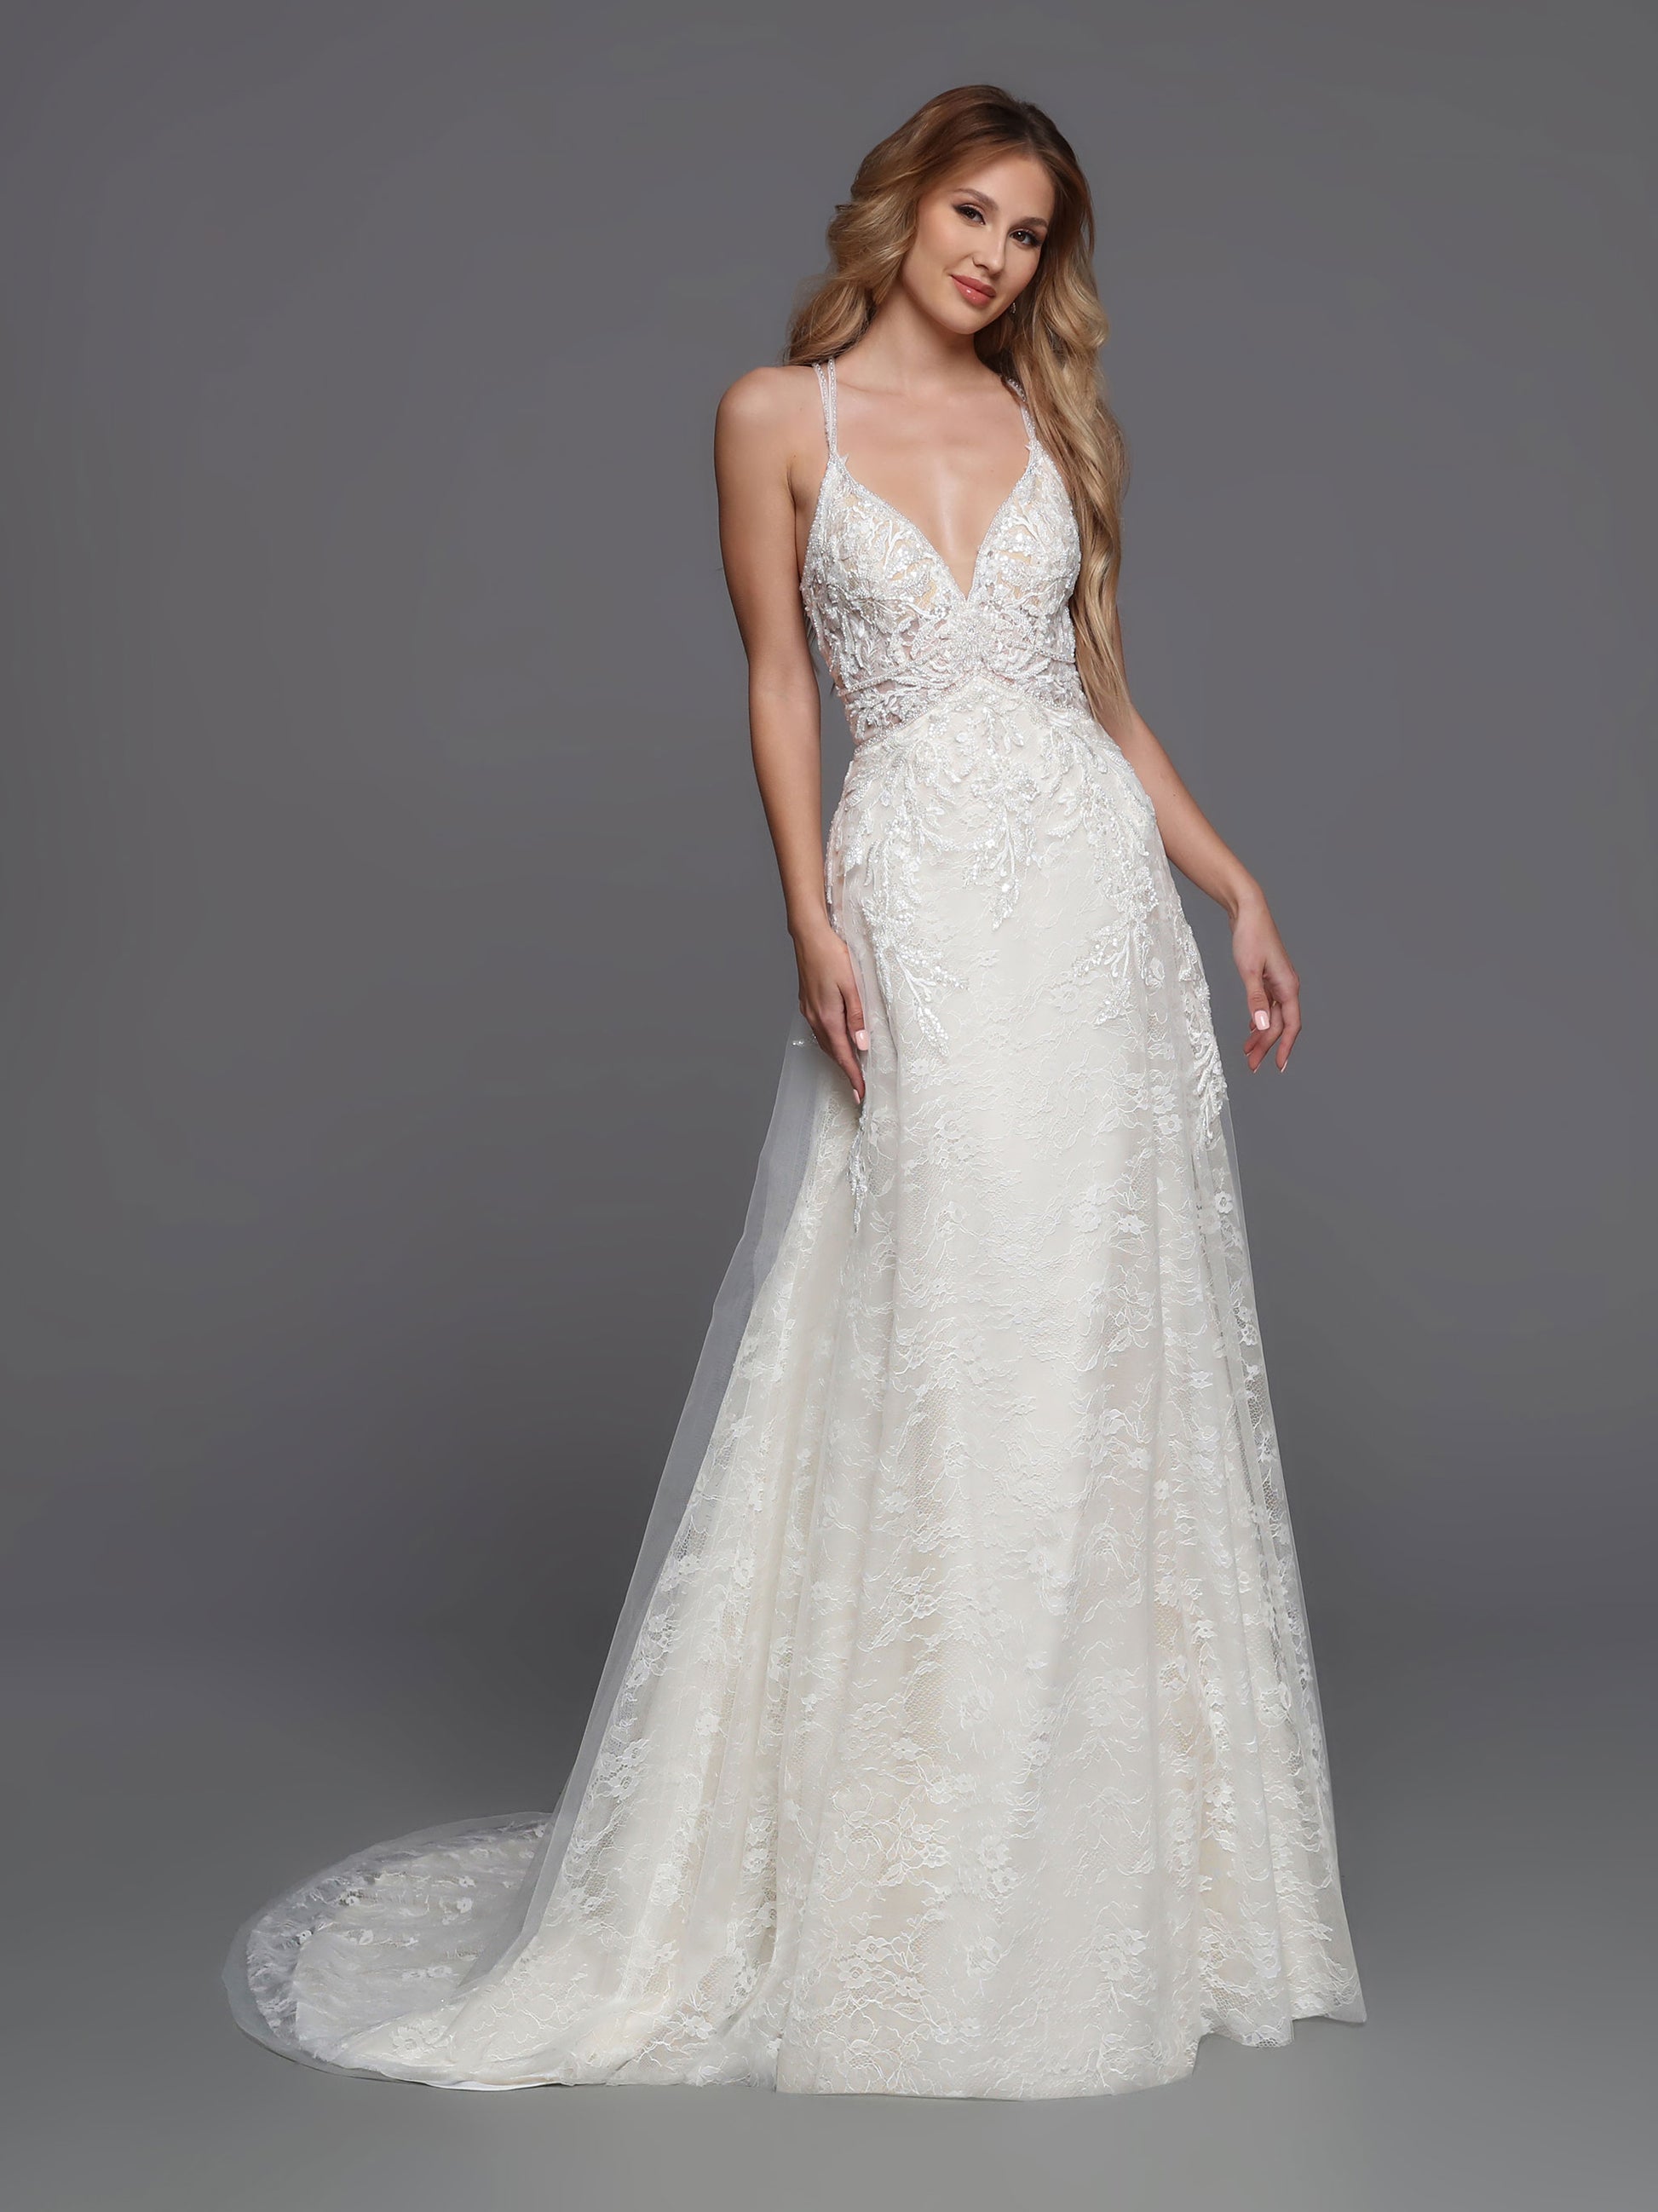 DaVinci Bridal 50736 A-Line V-Neck Keyhole Back Lace Appliques Tulle Train Wedding Gown. Be a vision in this romantic tulle and lace slip dress with its beaded lace bodice, shaped waistband, and open keyhole back.